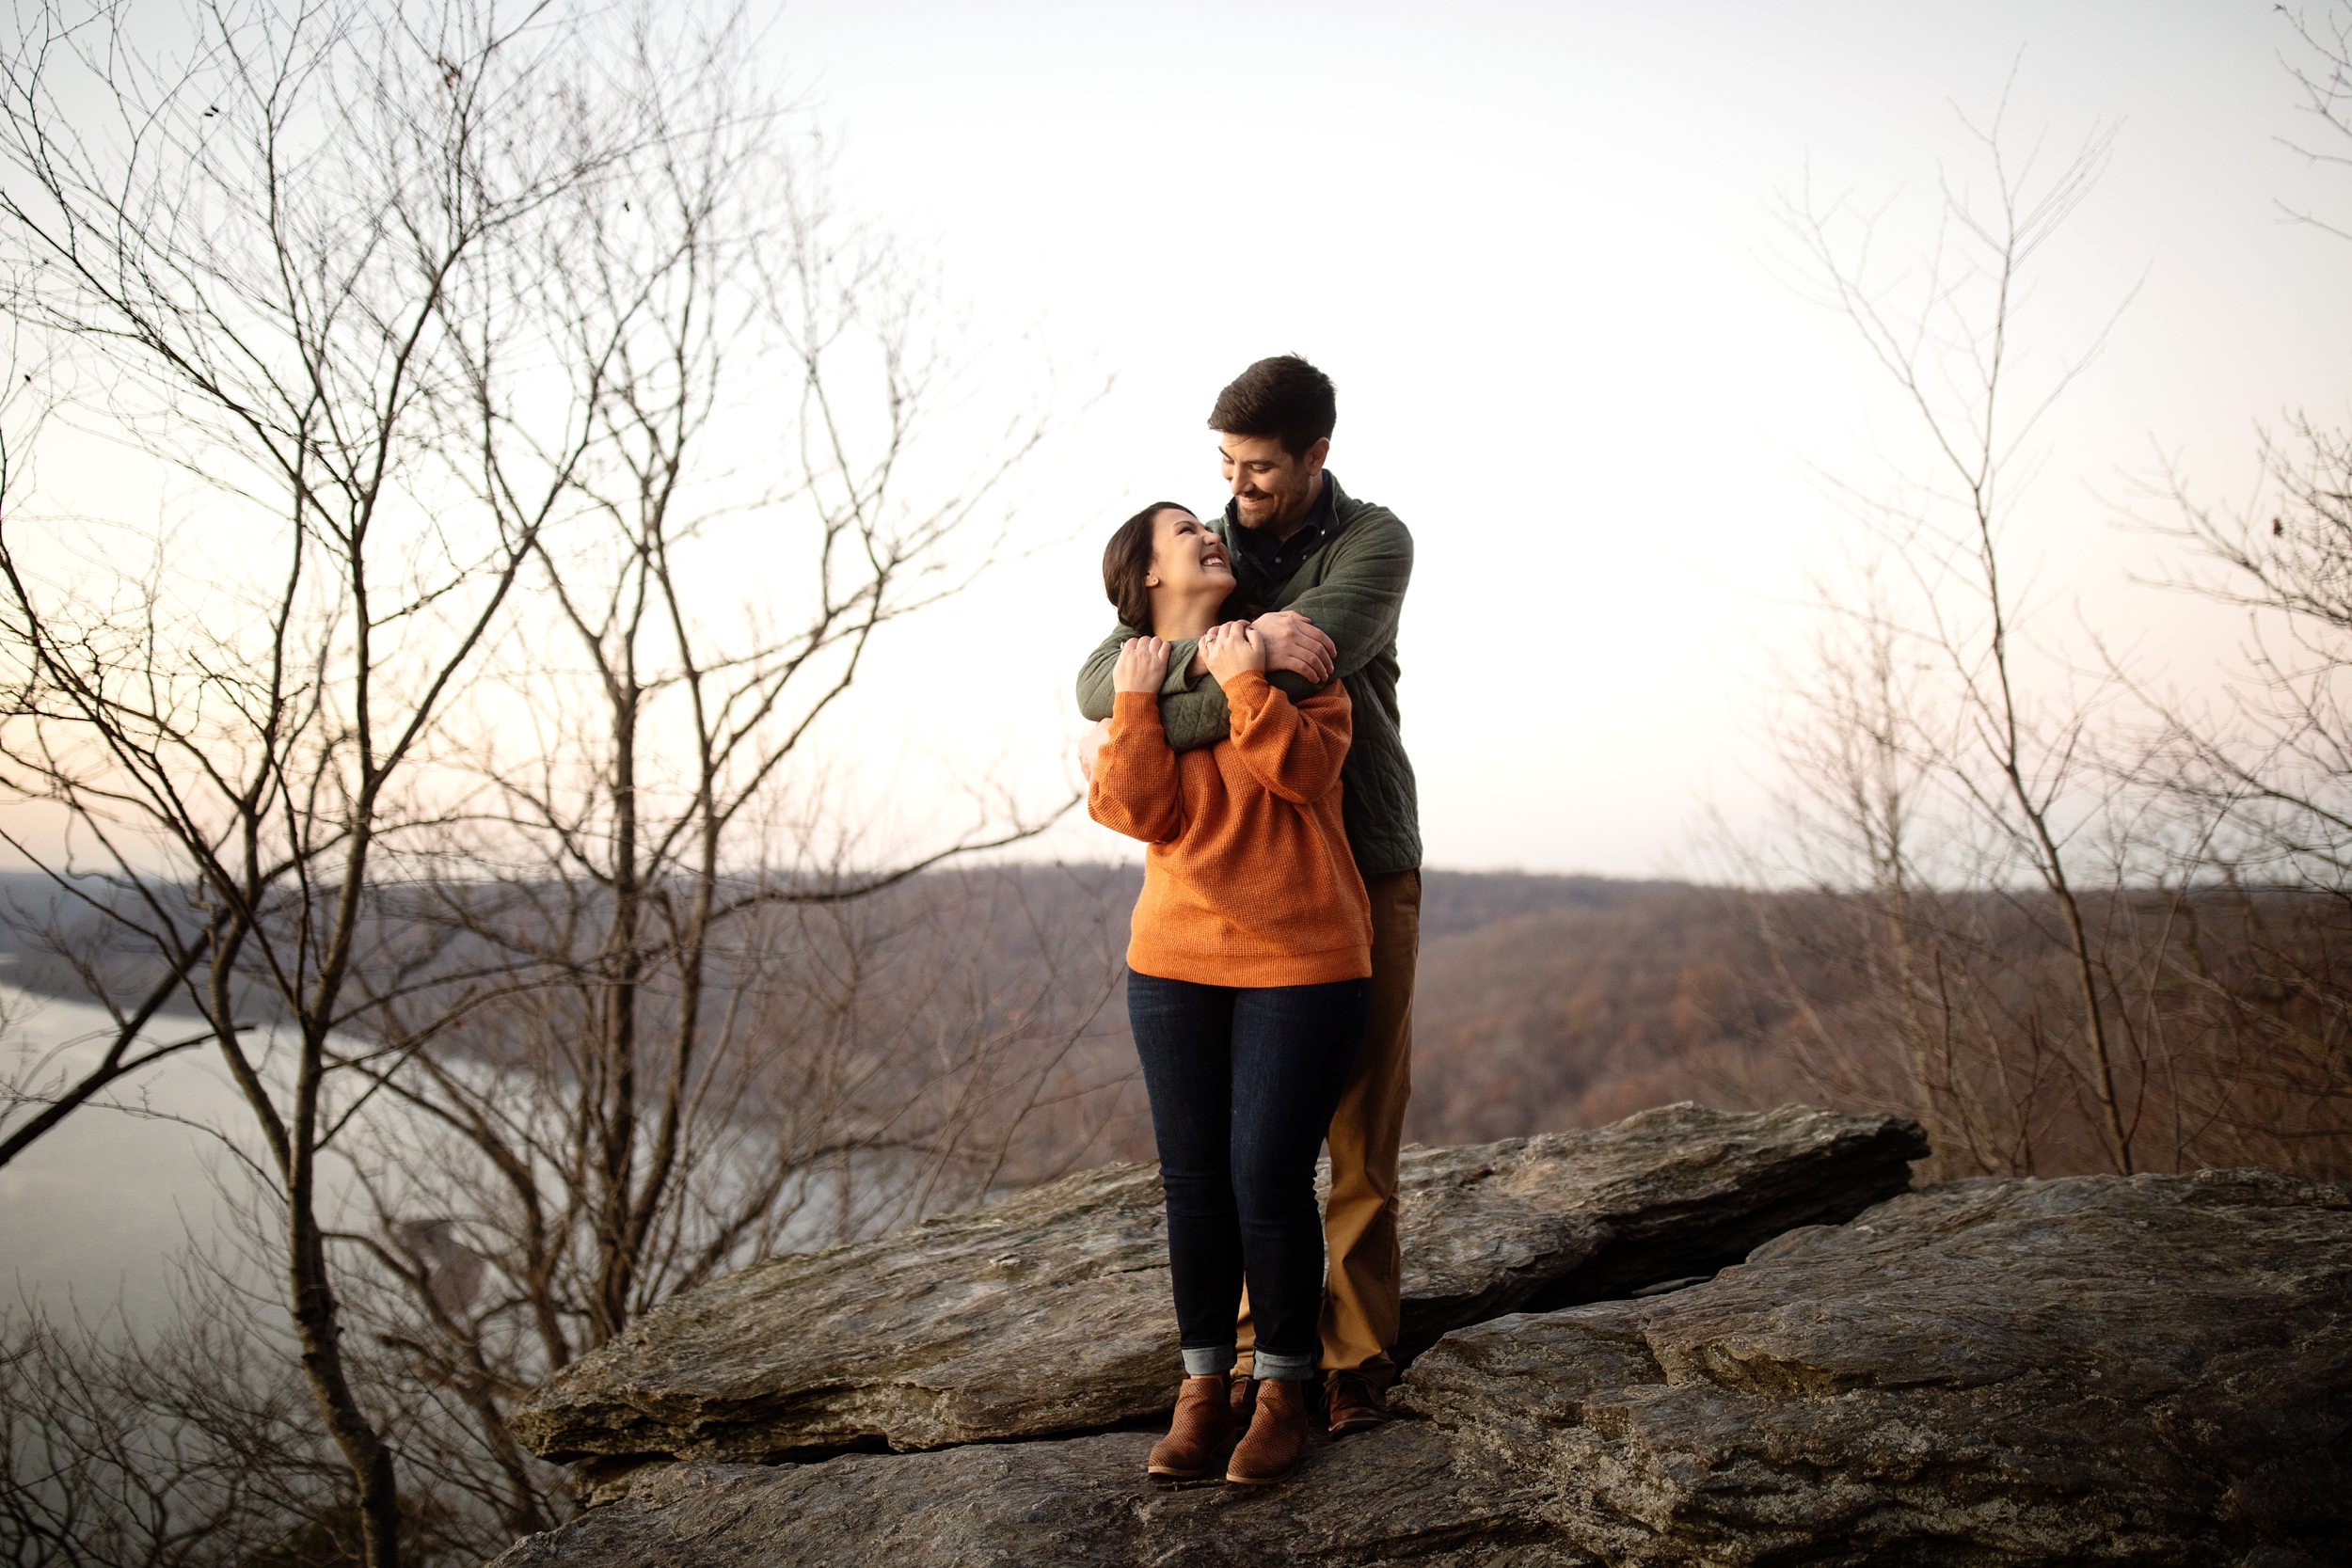 The Pinnacle Overlook Lancaster PA Fall Engagement Photo Session